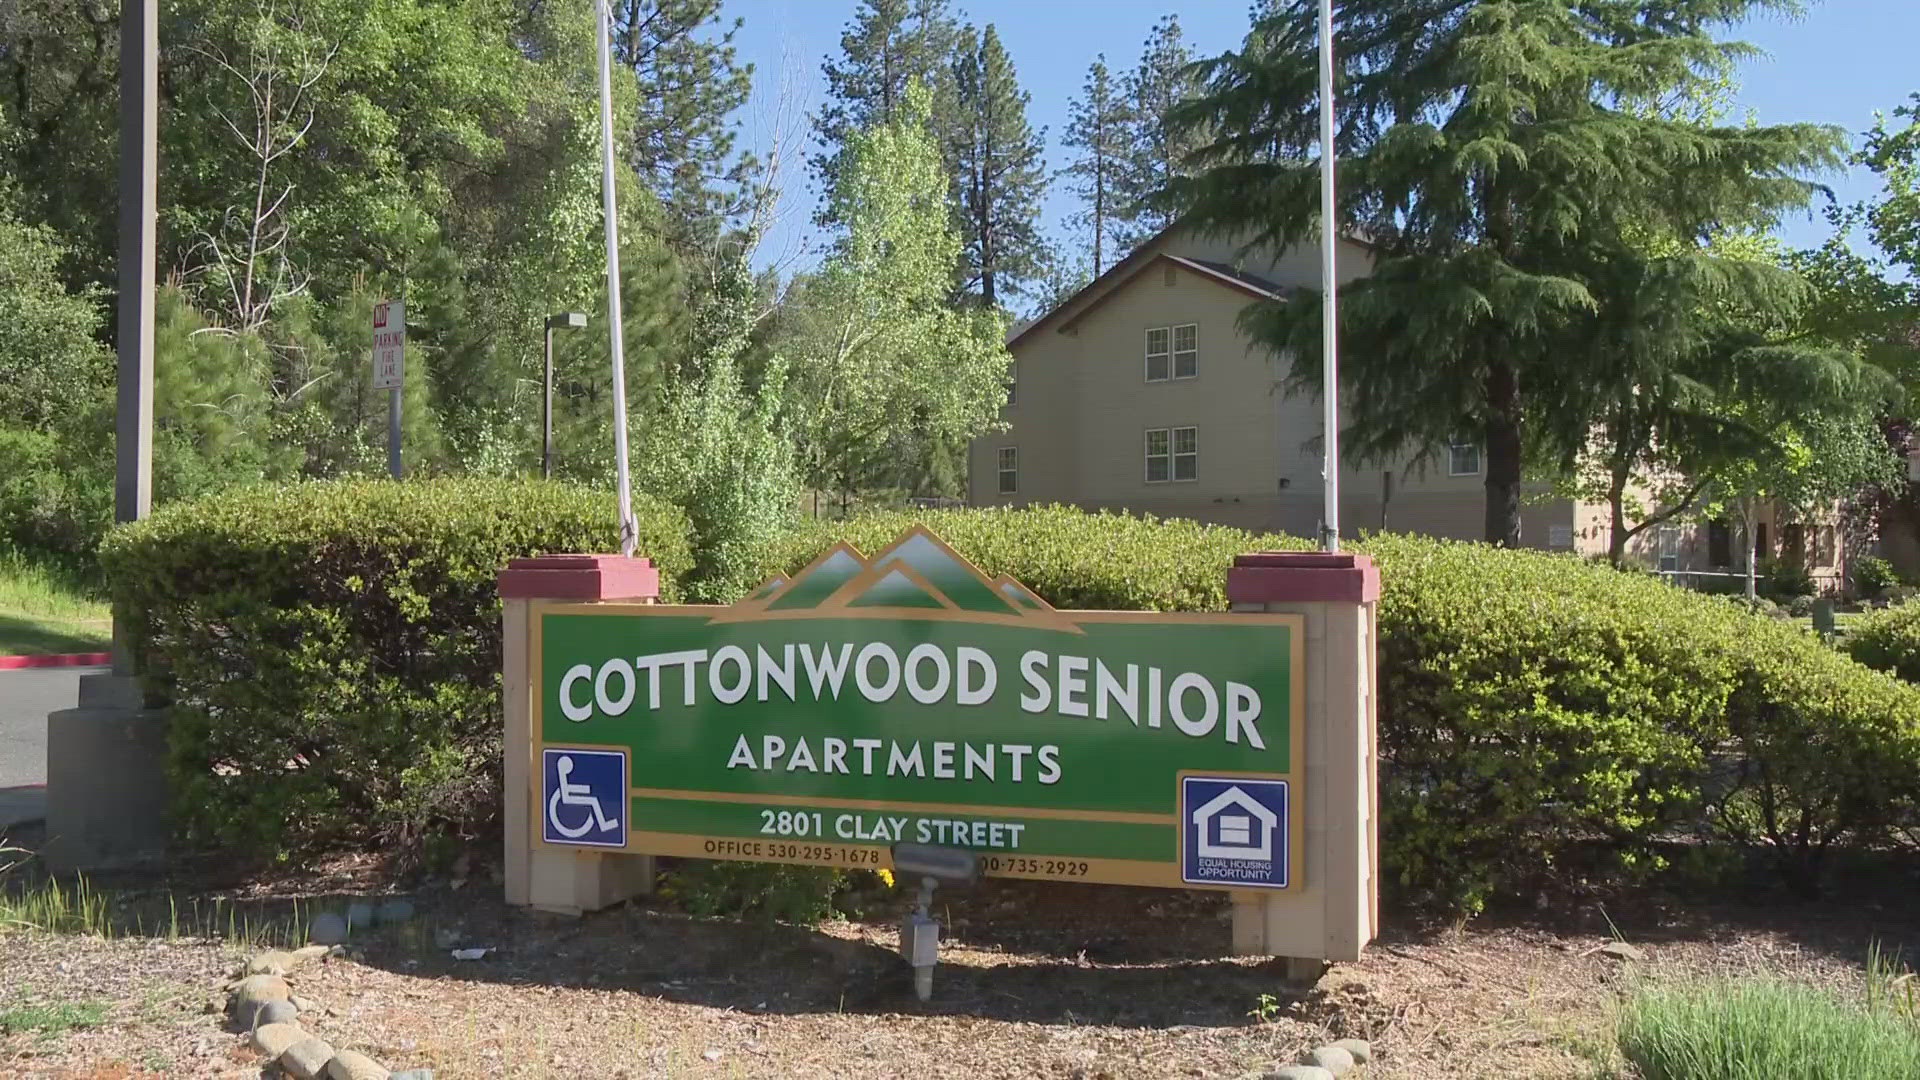 About 80 residents were displaced after flooding caused damage to the first and second floors of the Cottonwood Senior Apartments in Placerville.